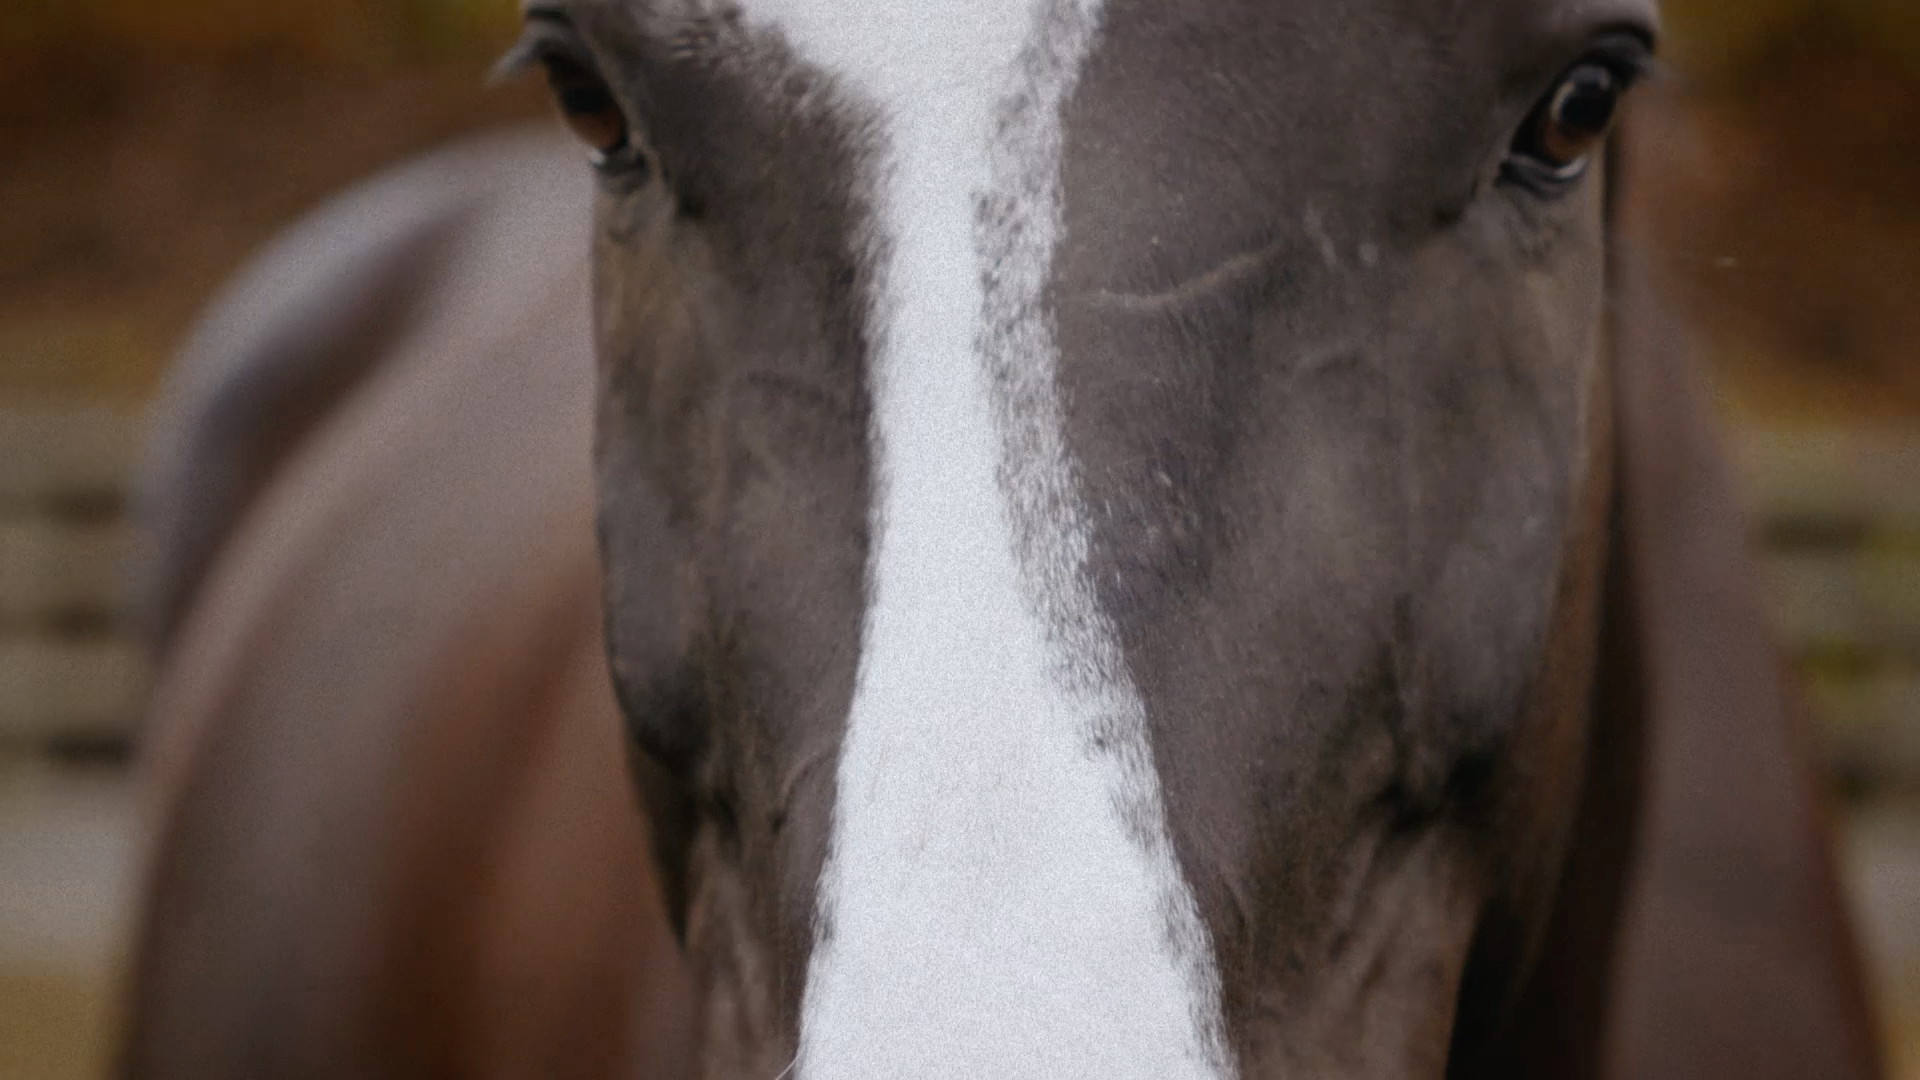 Healing Power of Horses – Stella McCartney and The Chopra Foundation's  Campaign